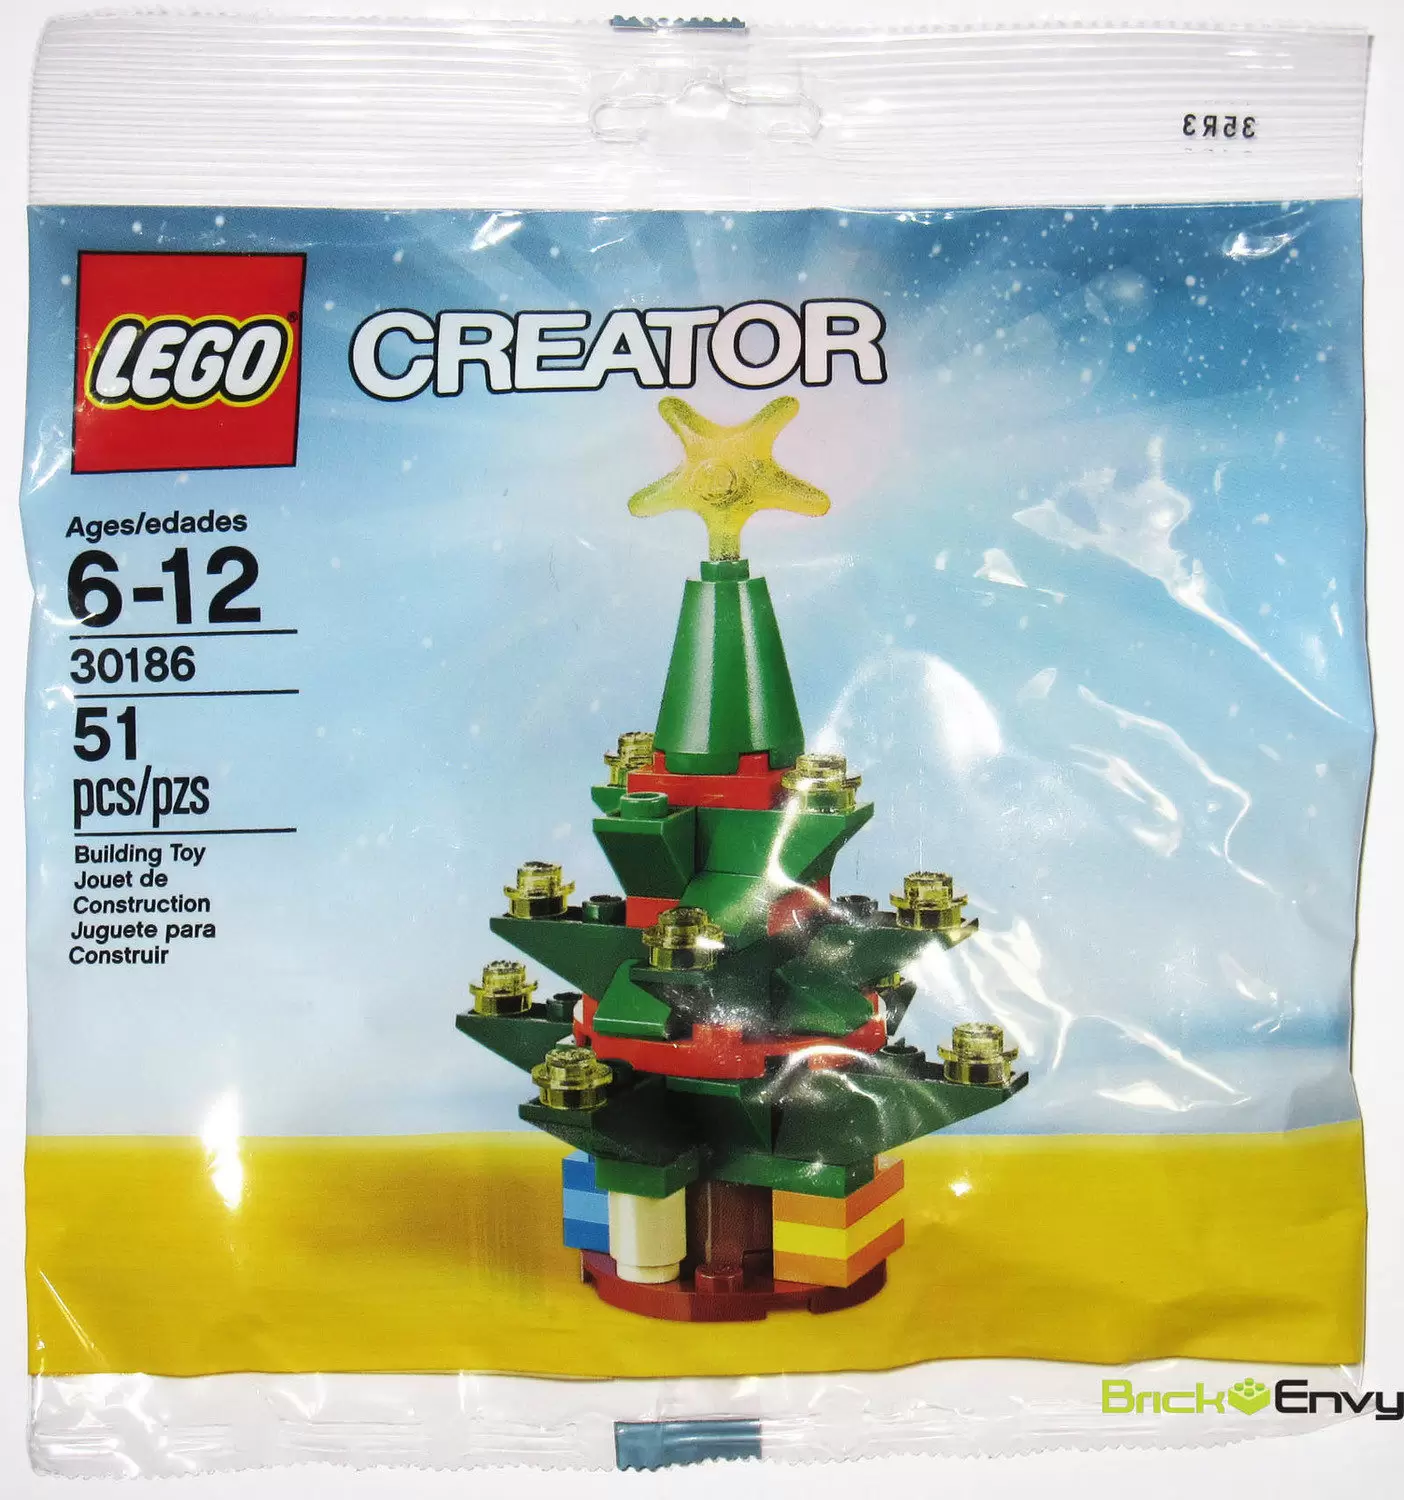 DIY Lego Christmas Tree – For Parents,Teachers, Scout Leaders & Really Just  Everyone!